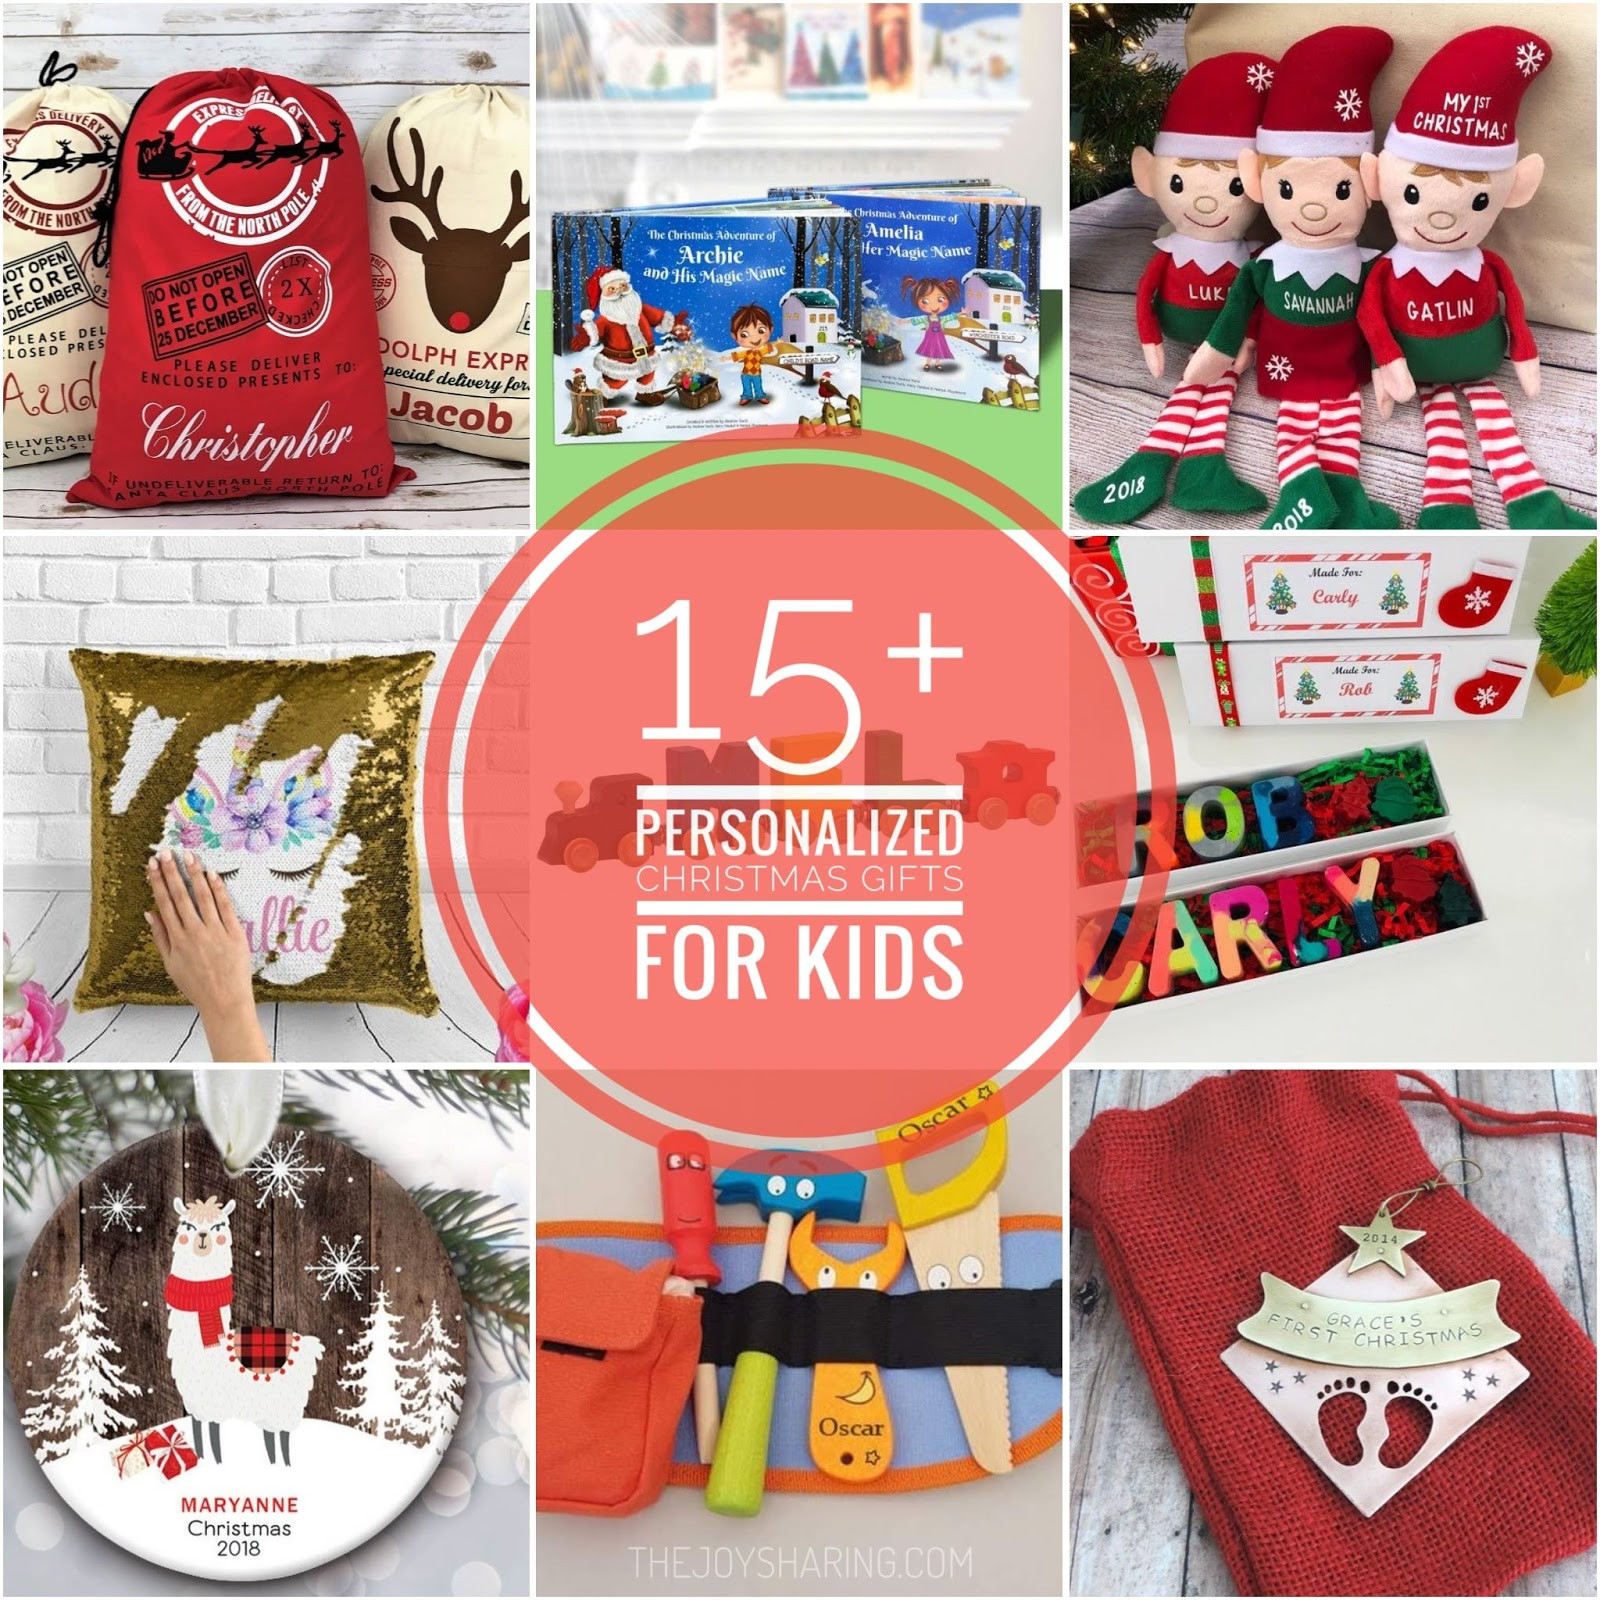 Unique Kids Christmas Gifts
 15 Personalized Christmas Gifts for Kids The Joy of Sharing